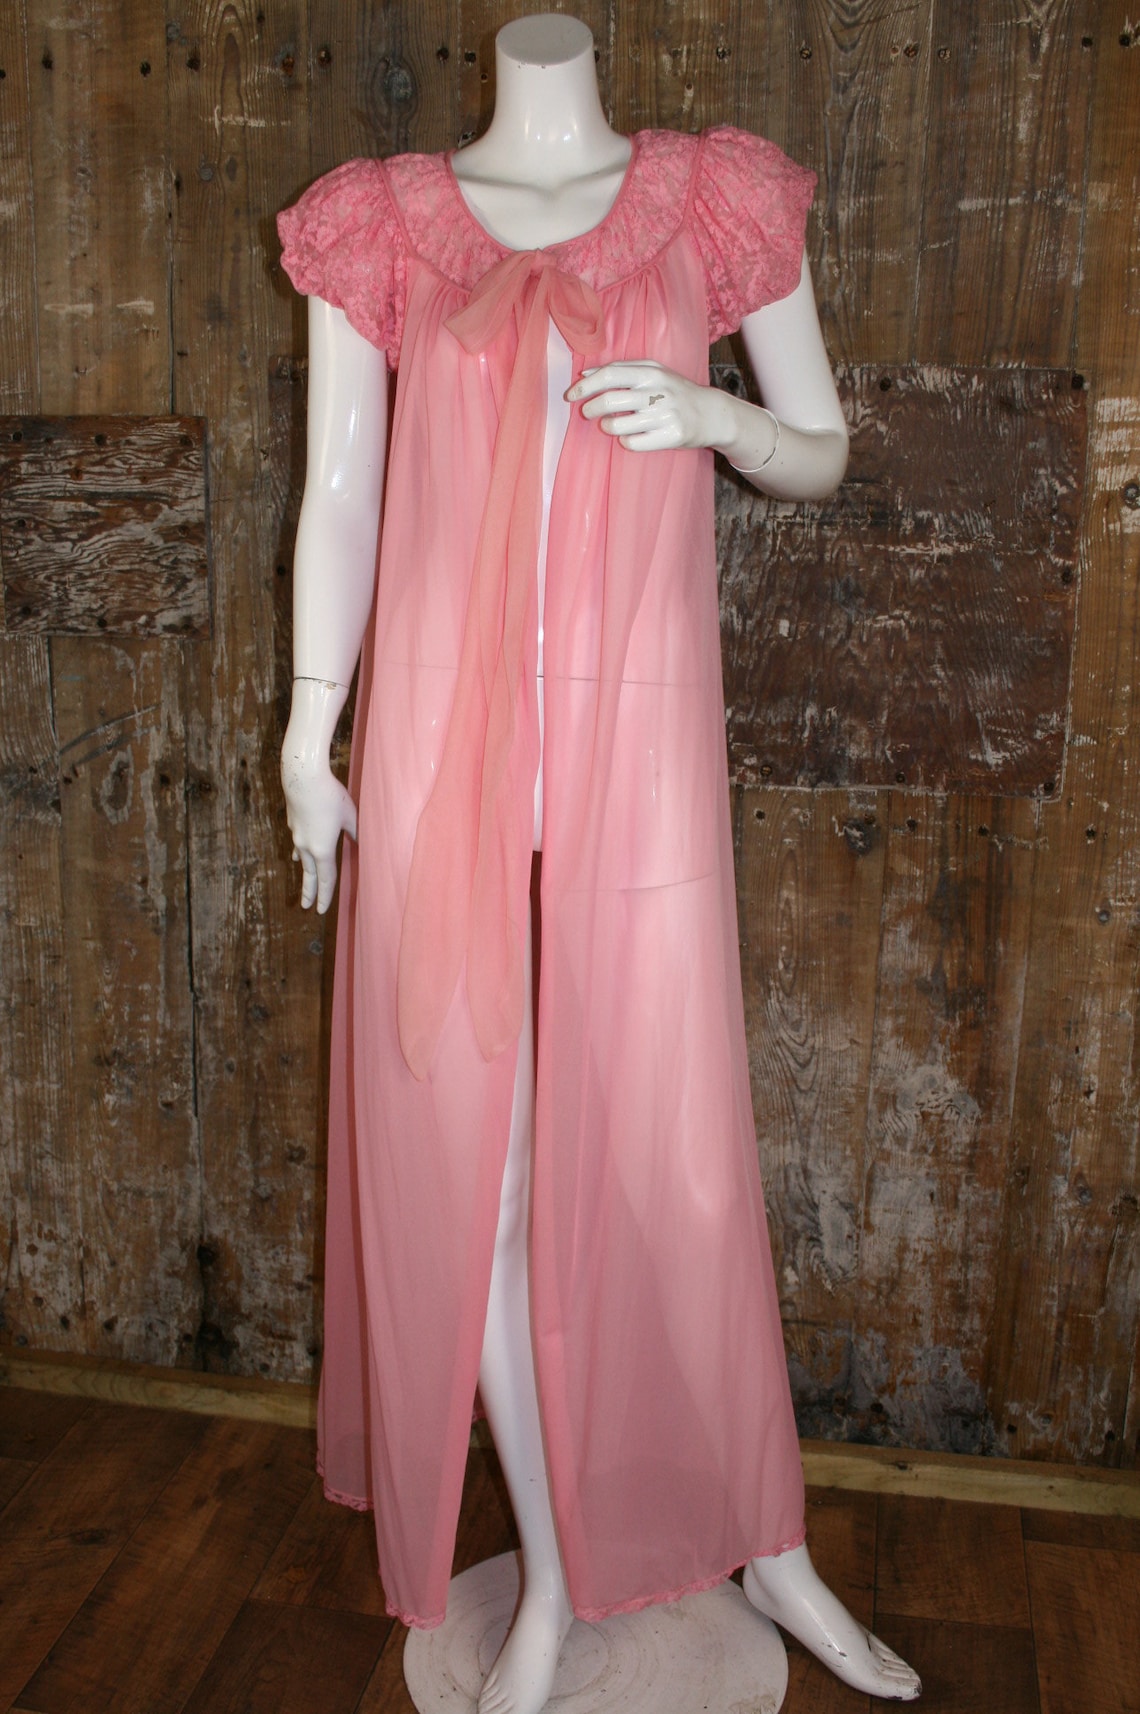 Vintage 60s 70s Pink Nylon Negligee Housecoat St Michael Etsy